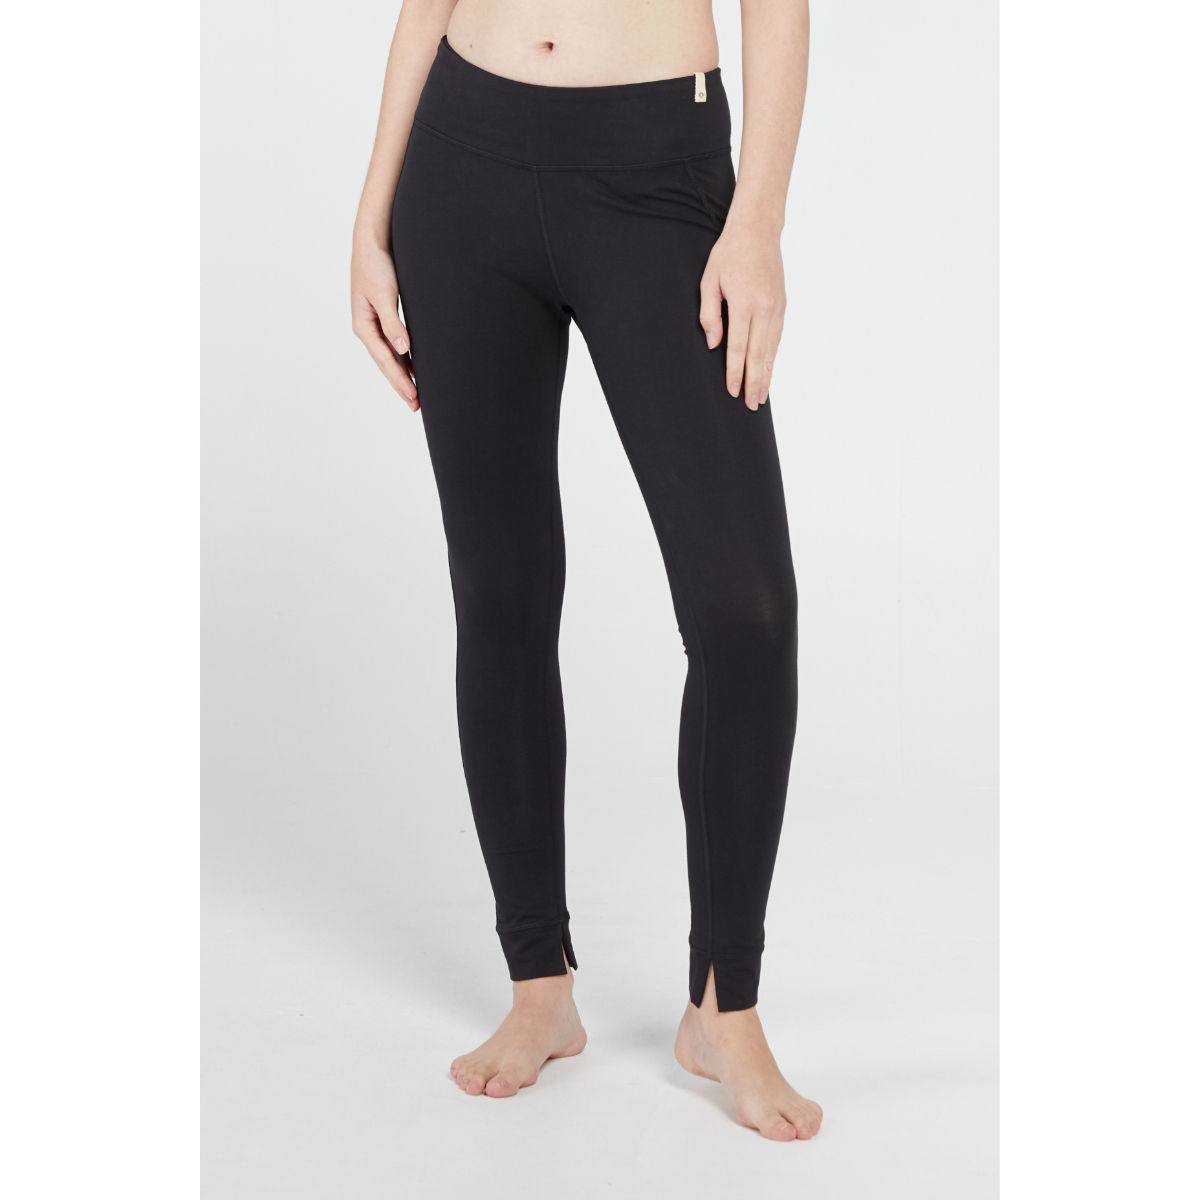 Buy Tights For Women, Tights For Women Online India - SEEQ